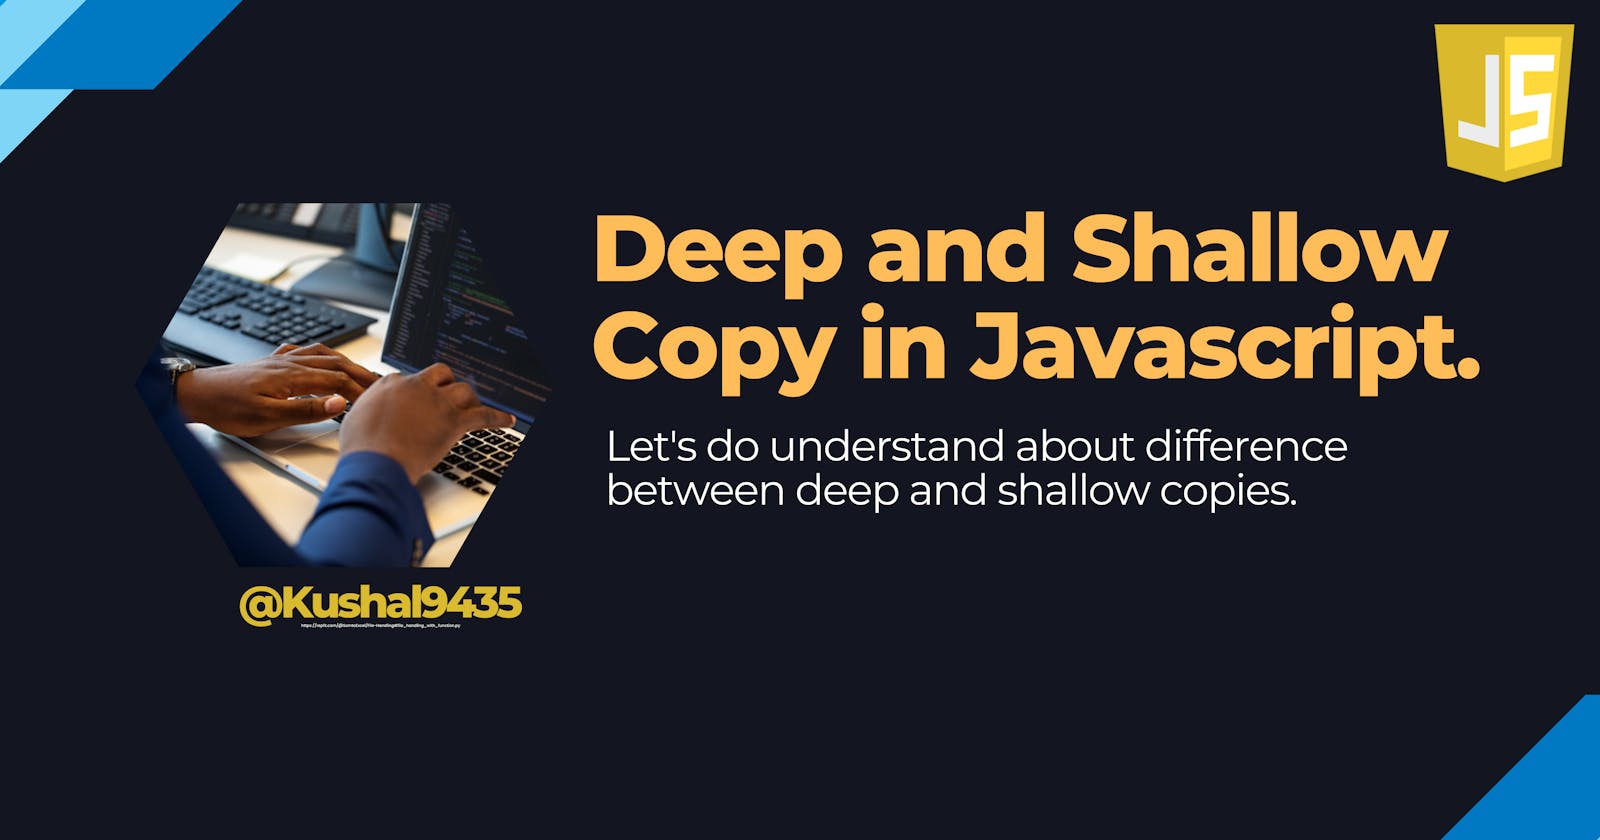 Difference between Deep and Shallow Copy in Javascript.